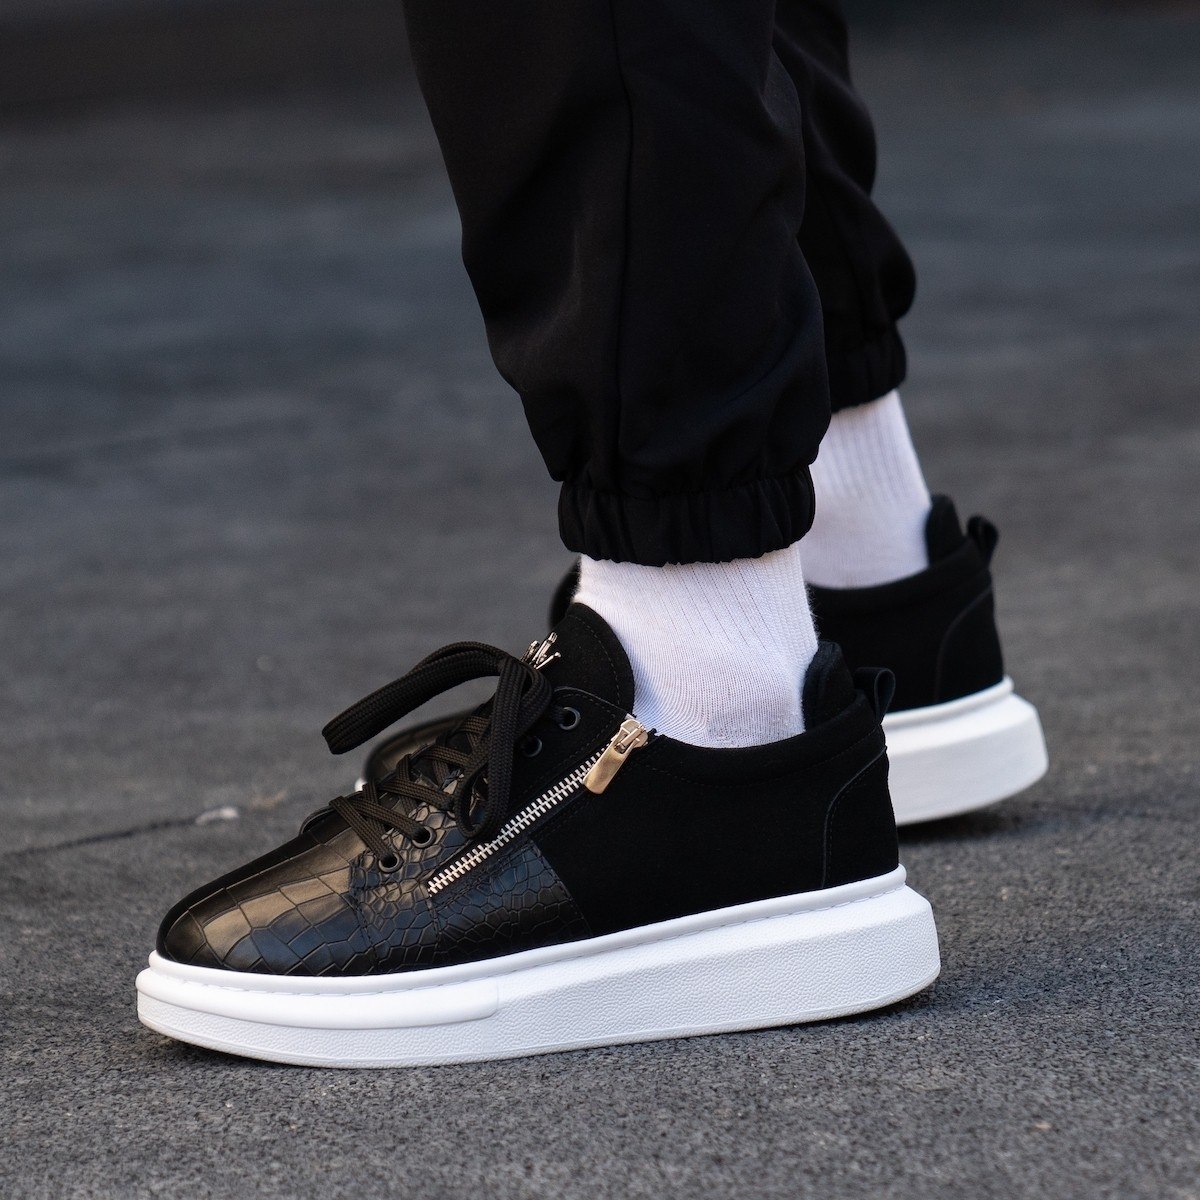 Hype Sole Zipped Style Sneakers in Black Suede Crocco Design | Martin Valen